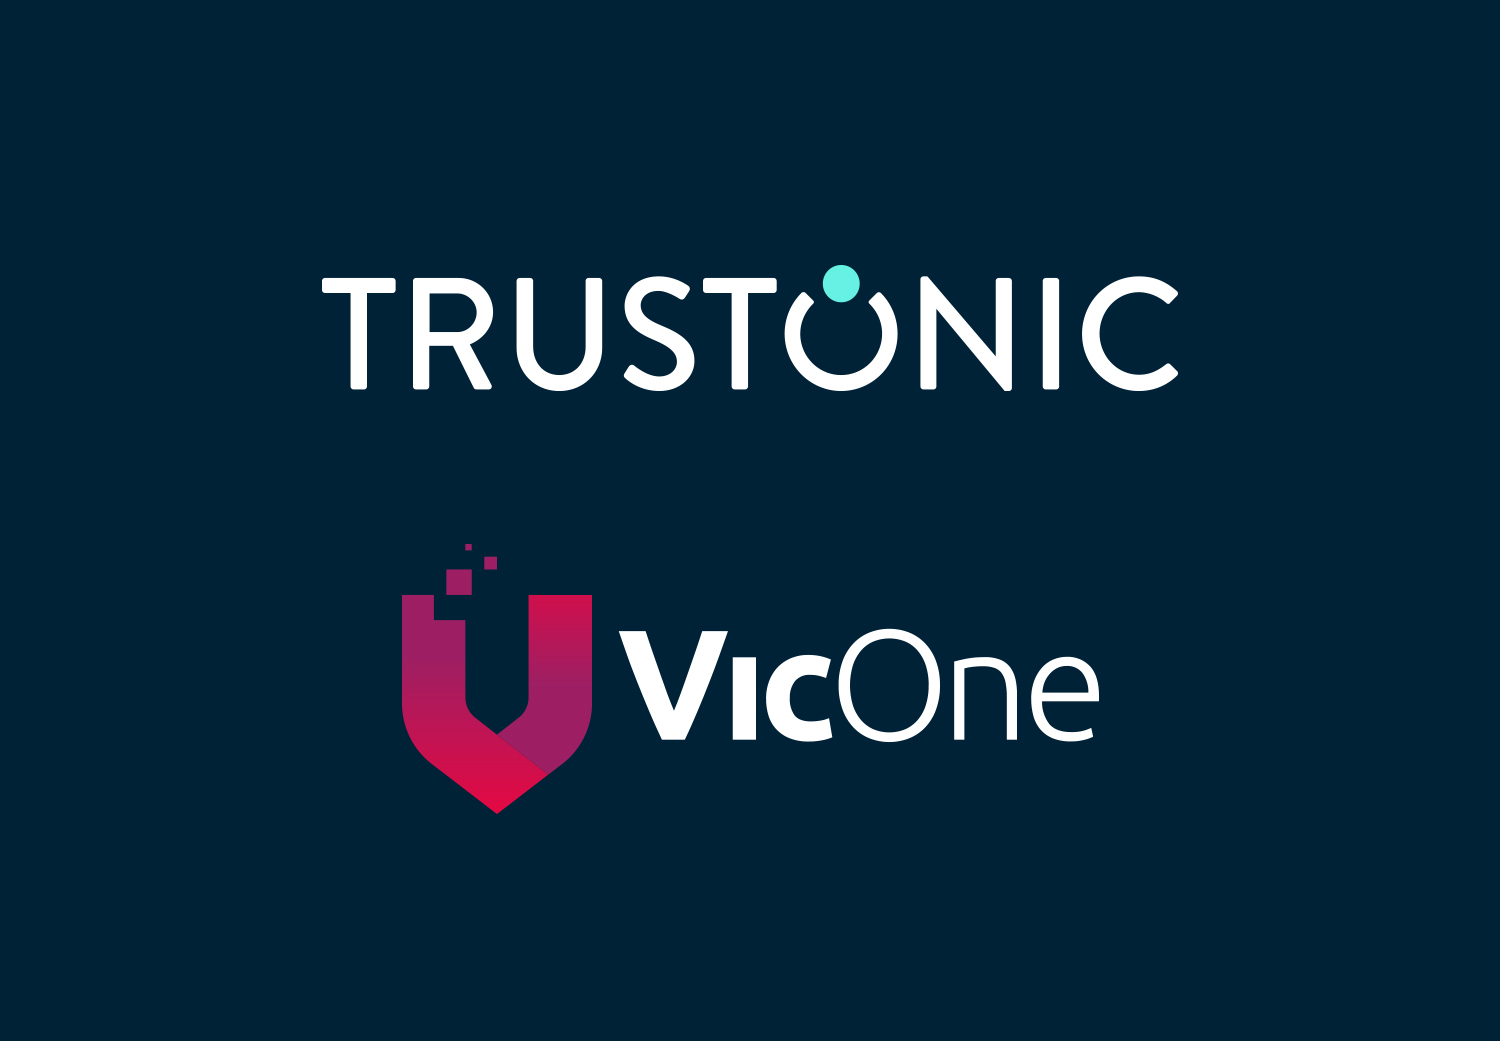 Trustonic and Vic One logos